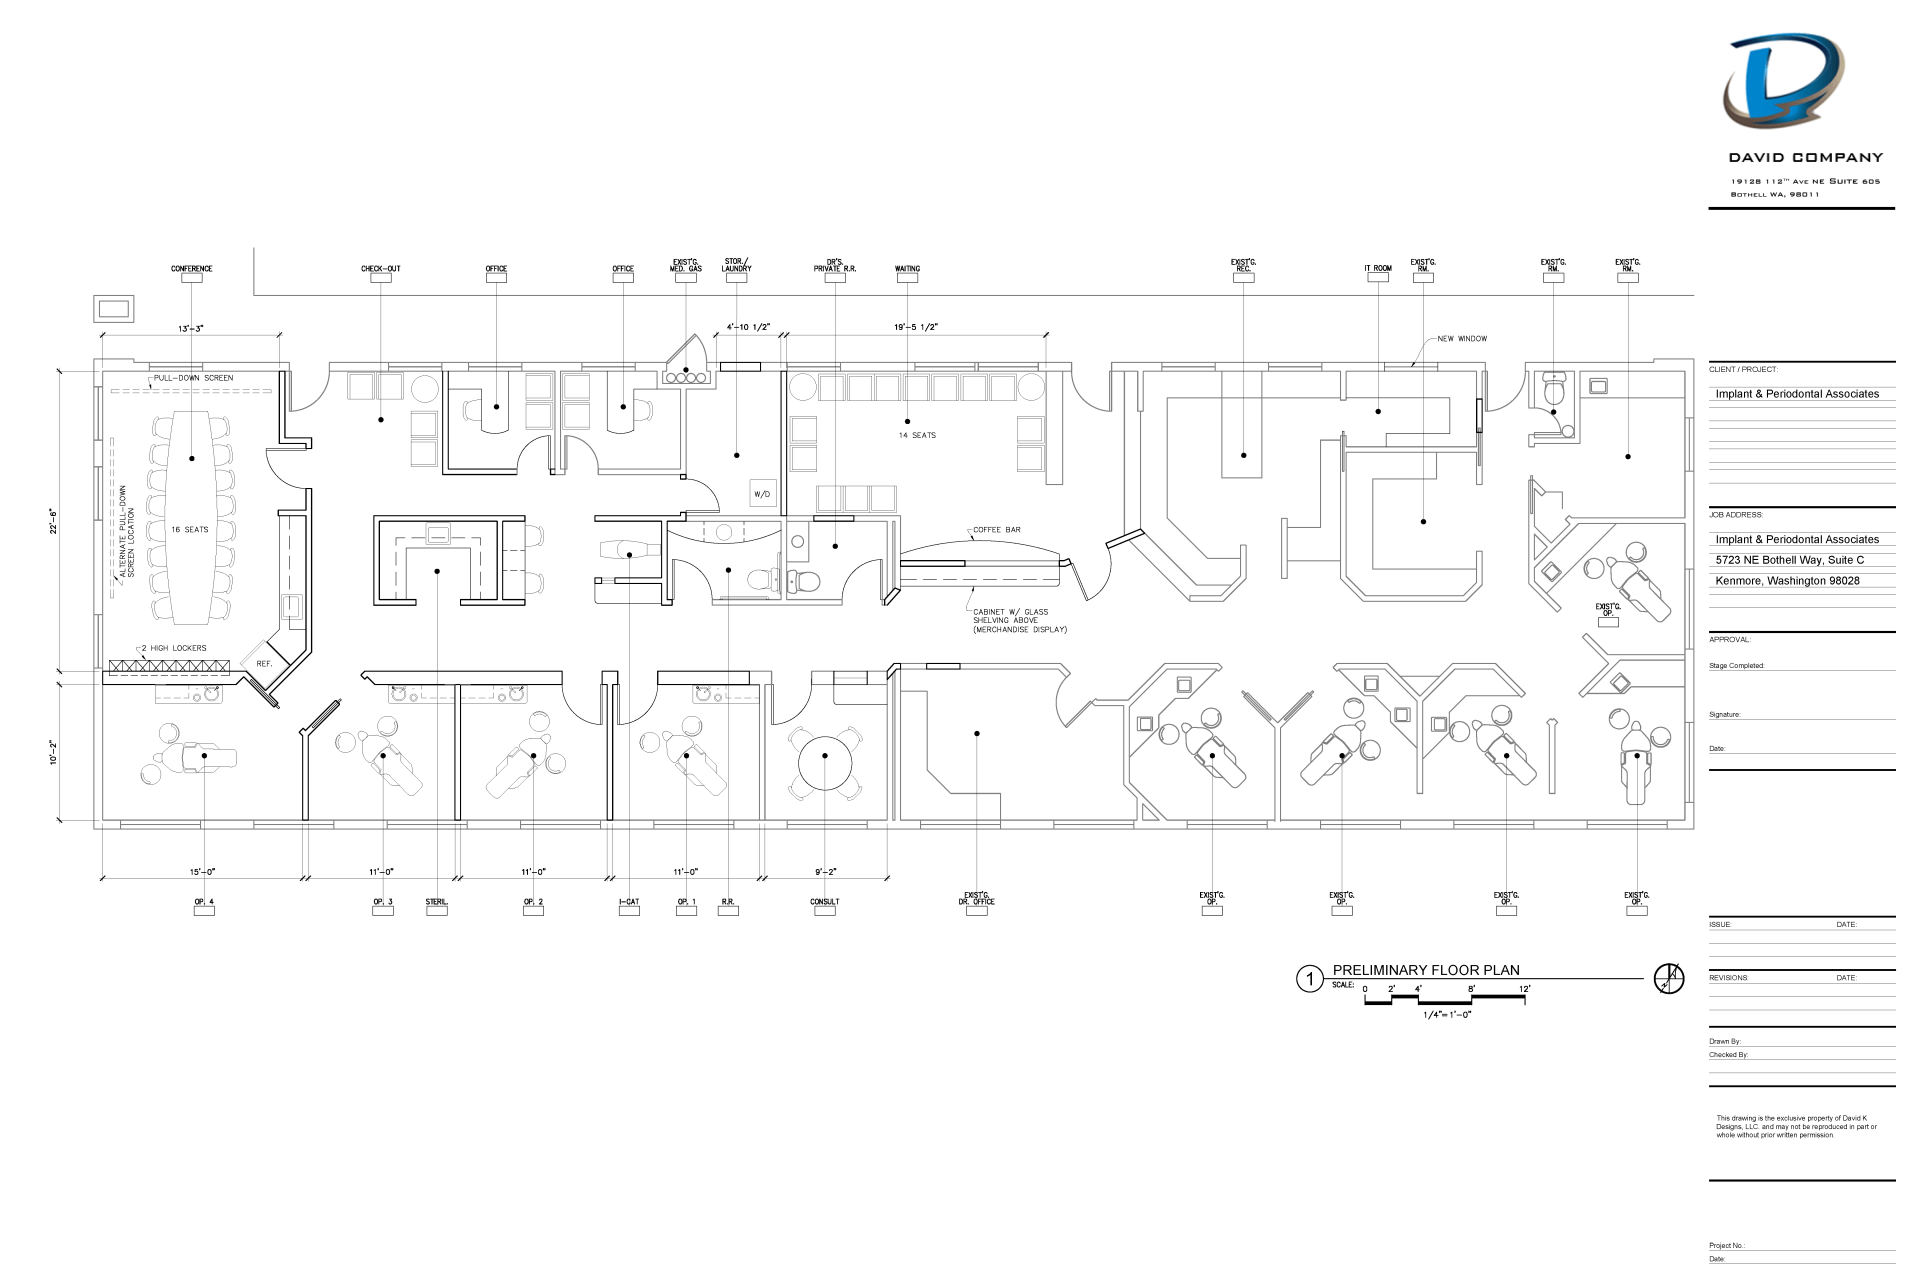 Floor plan drawling from Architecture design and build firm